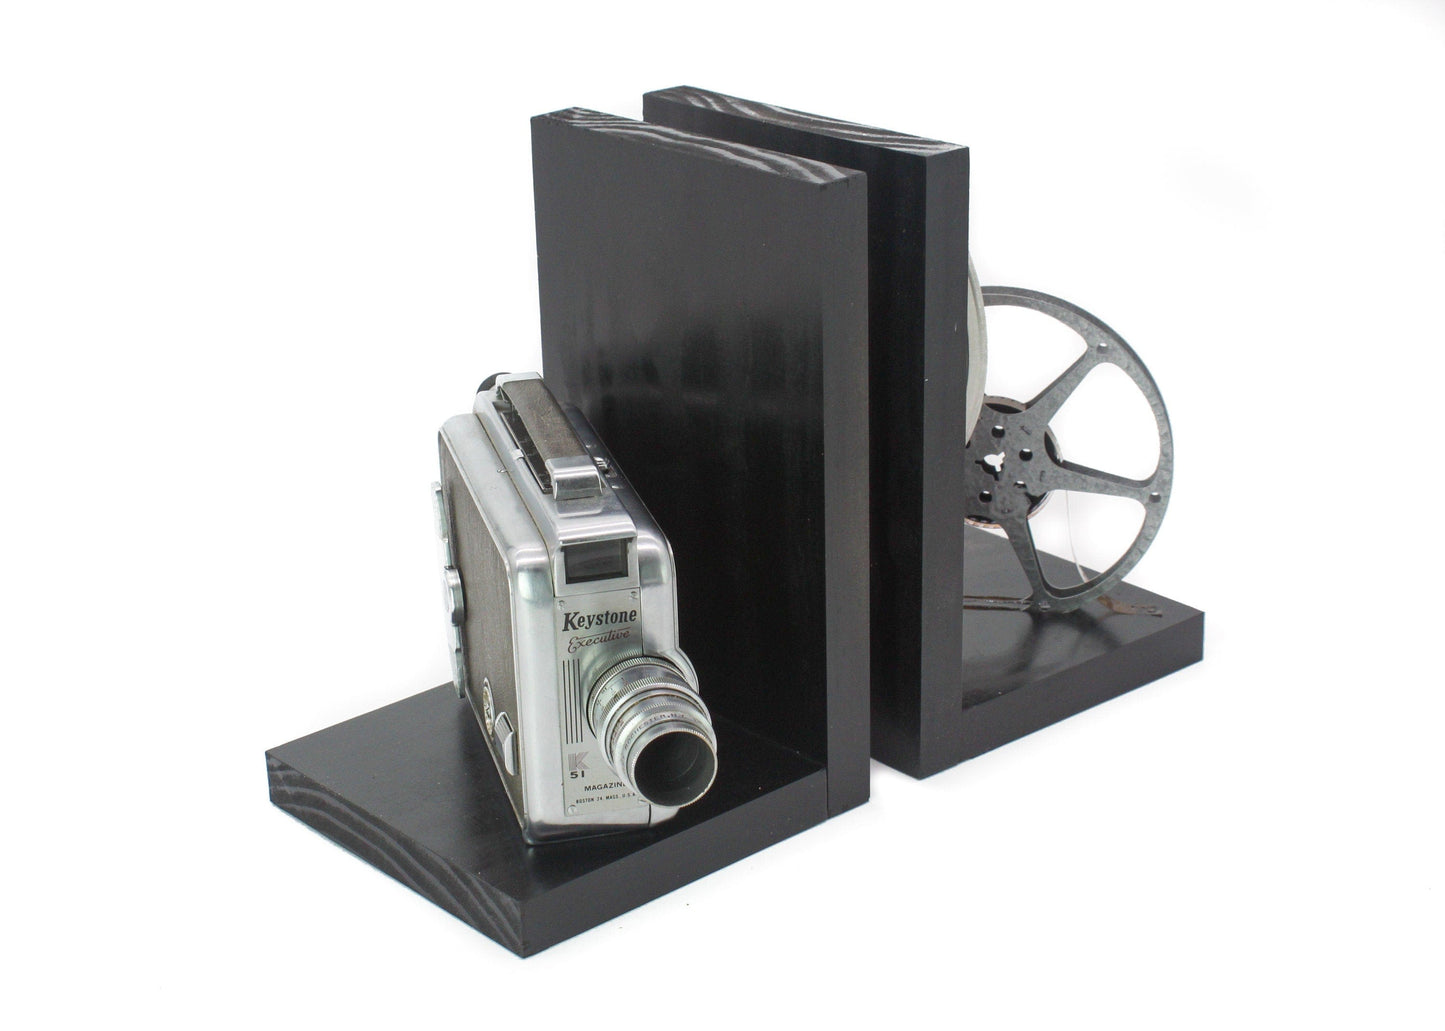 LightAndTimeArt Bookends Vintage Movie Camera Bookends - Keystone K51 Executive - DVD Holder - Home Theater Décor - Eco-friendly gift